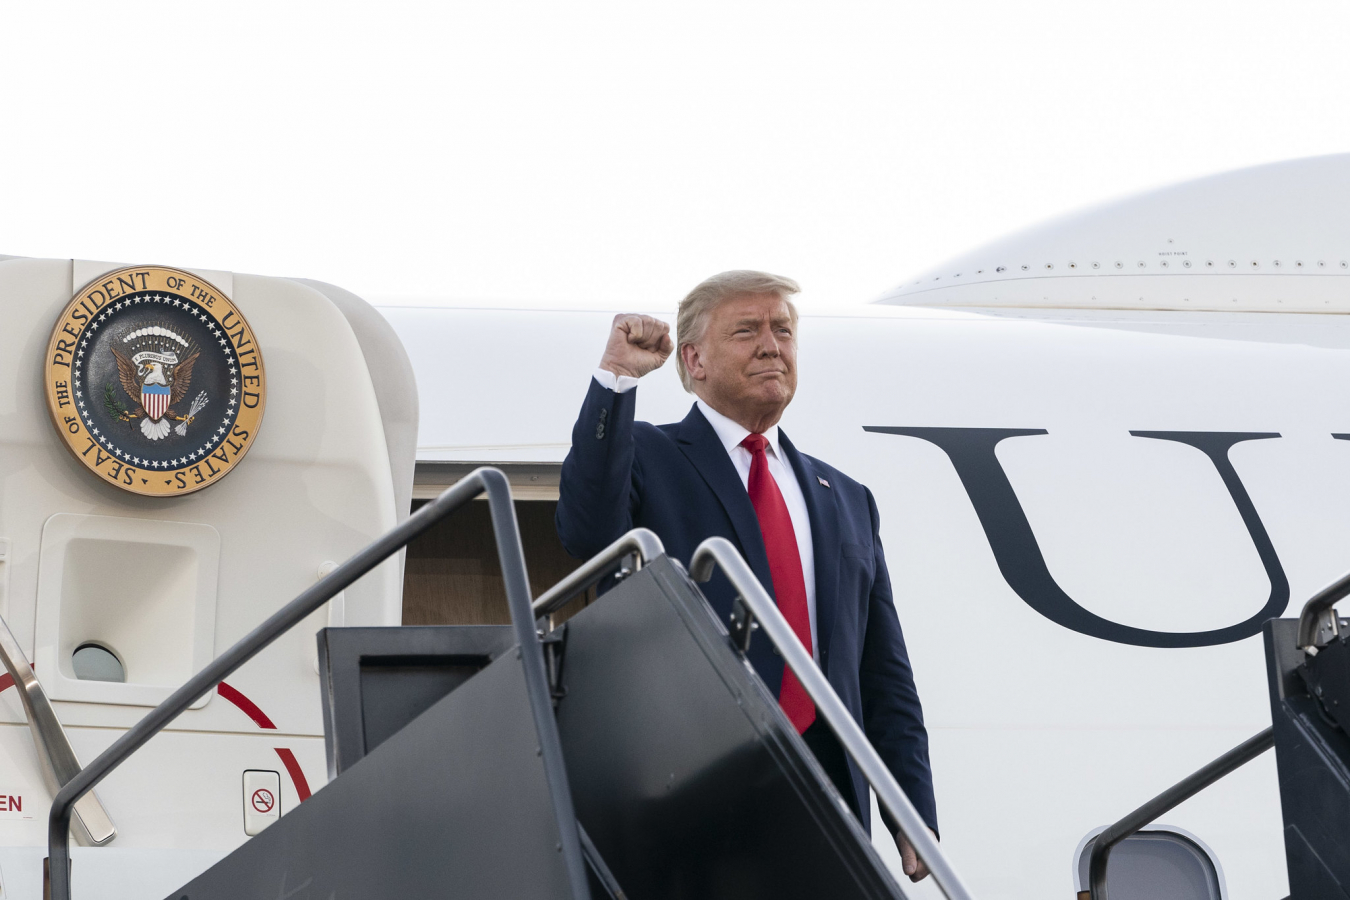 President Trump in New Hampshire, USA 28 August 2020